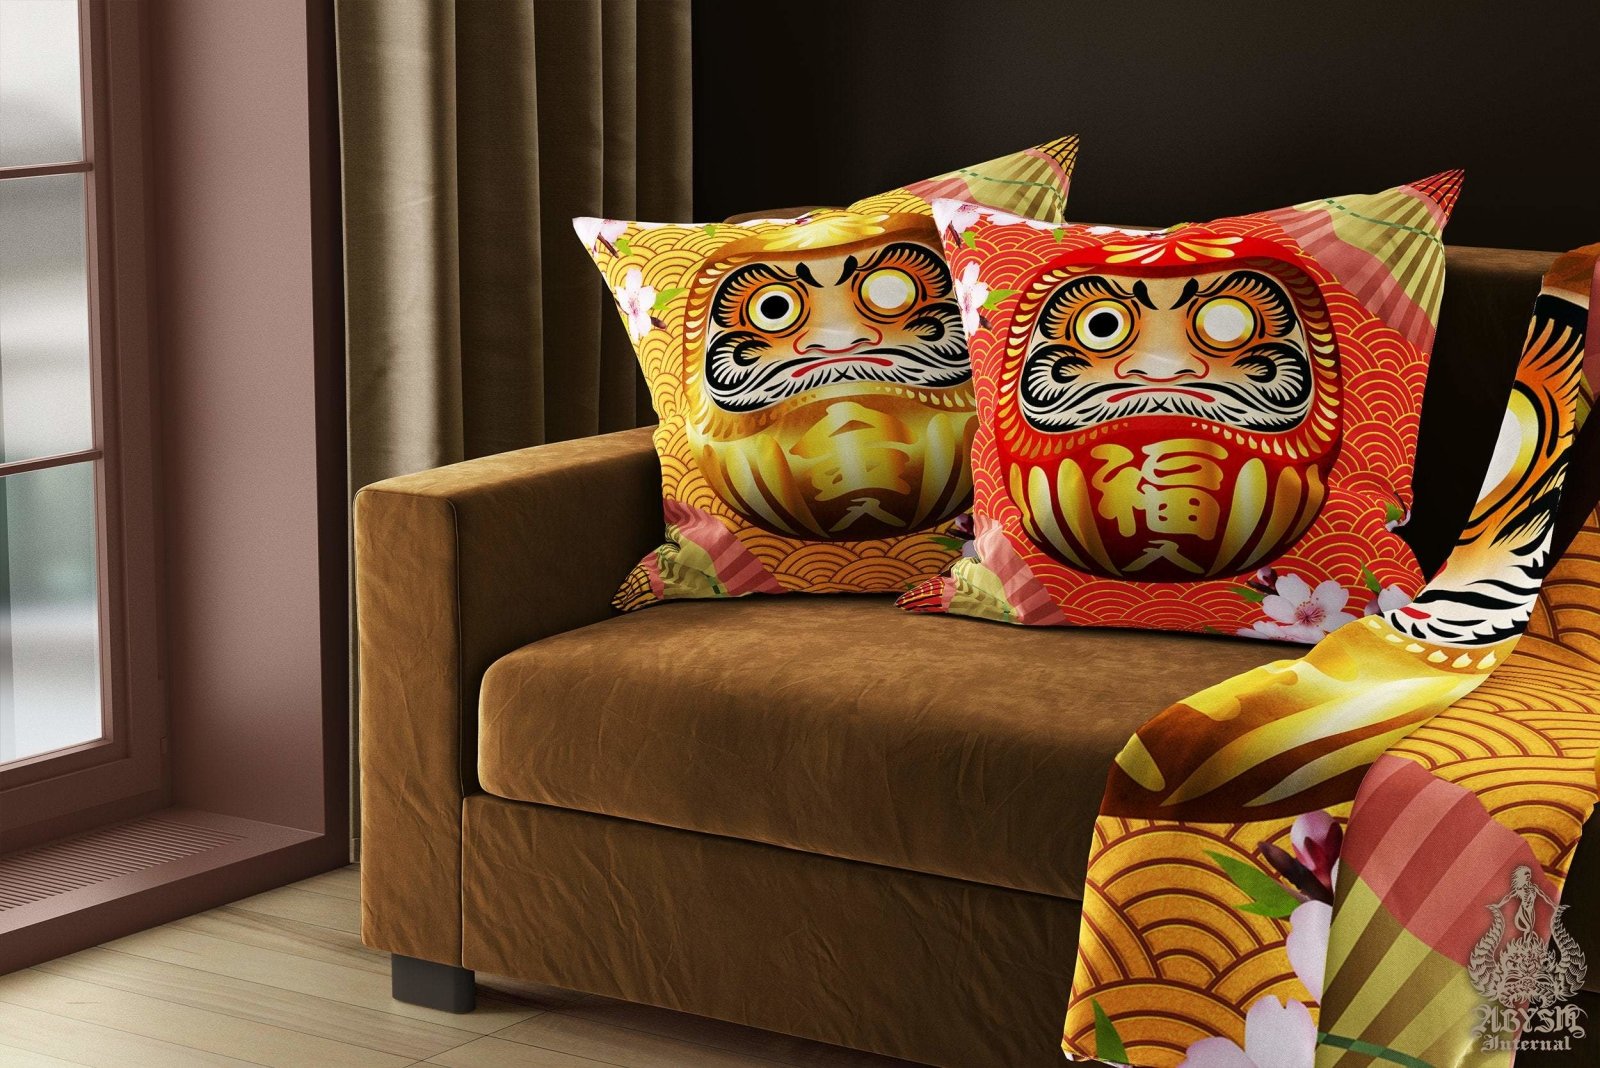 Daruma Throw Pillow, Decorative Accent Cushion, Japanese Art, Funky and Eclectic Home - Gold - Abysm Internal